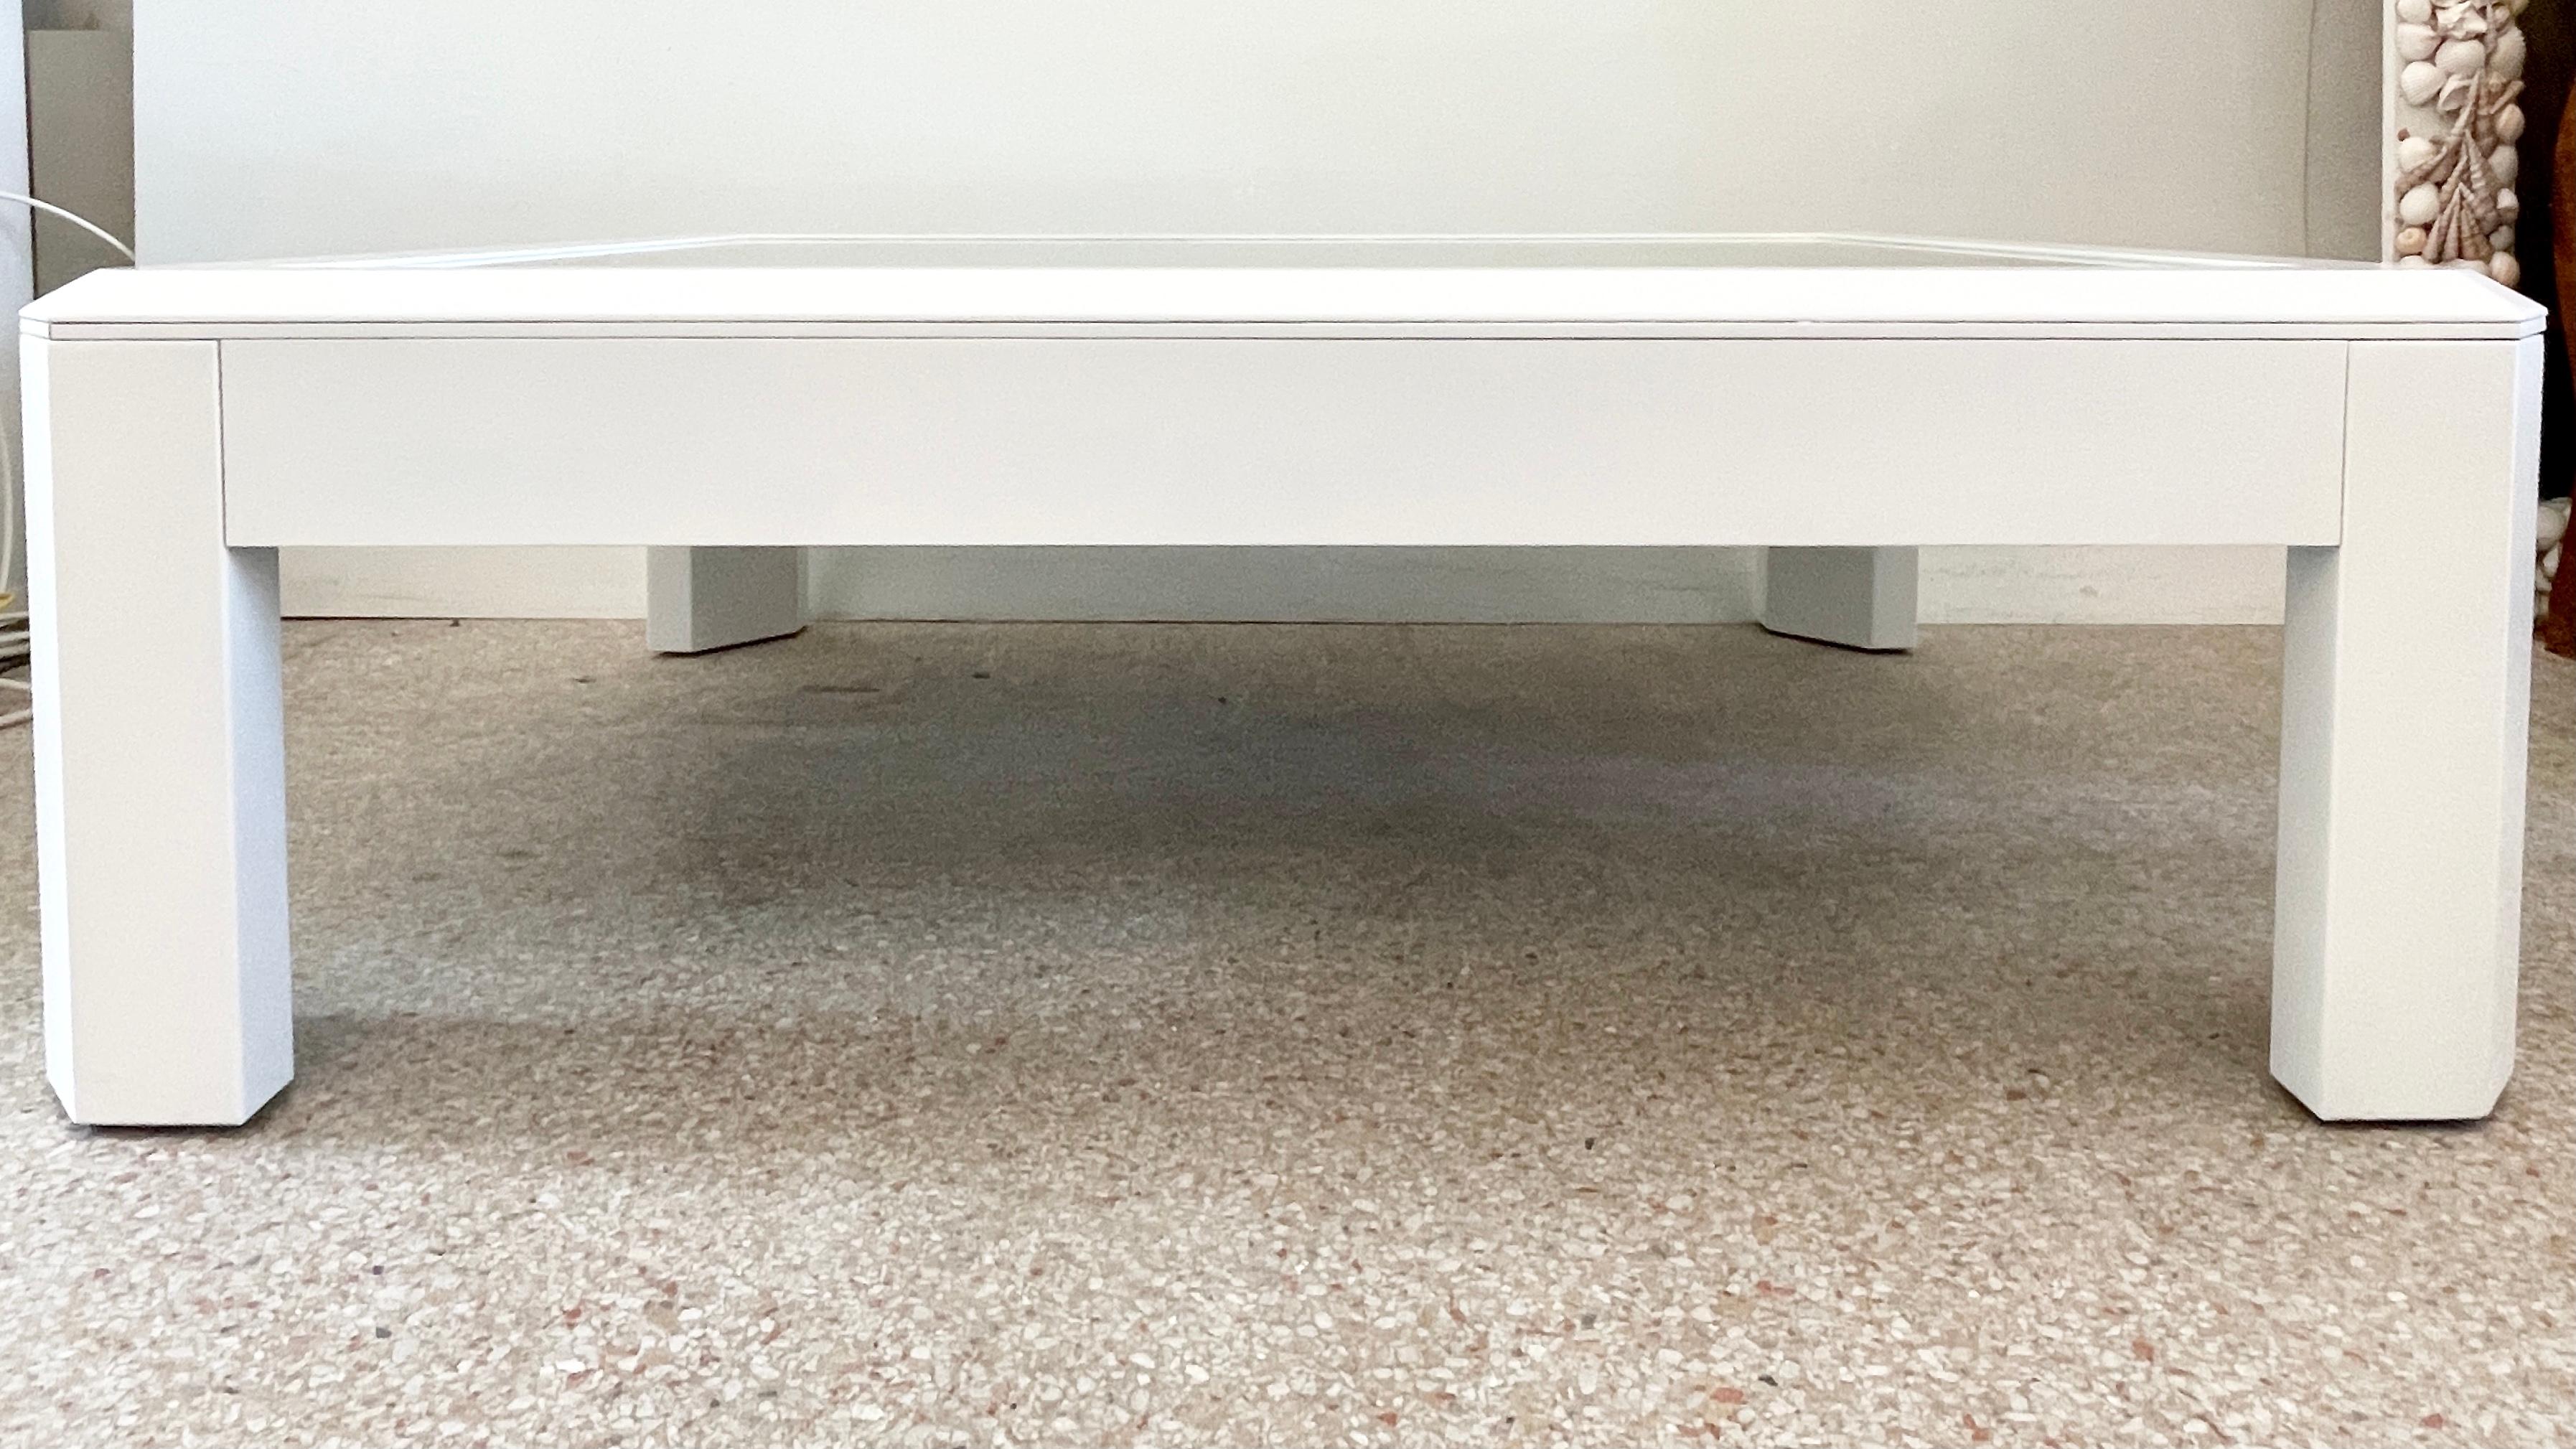 Fabulous modern faceted mirror top coffee table freshly lacquered in white. Mirror is new. Would make an amazing addition to your modern interiors.